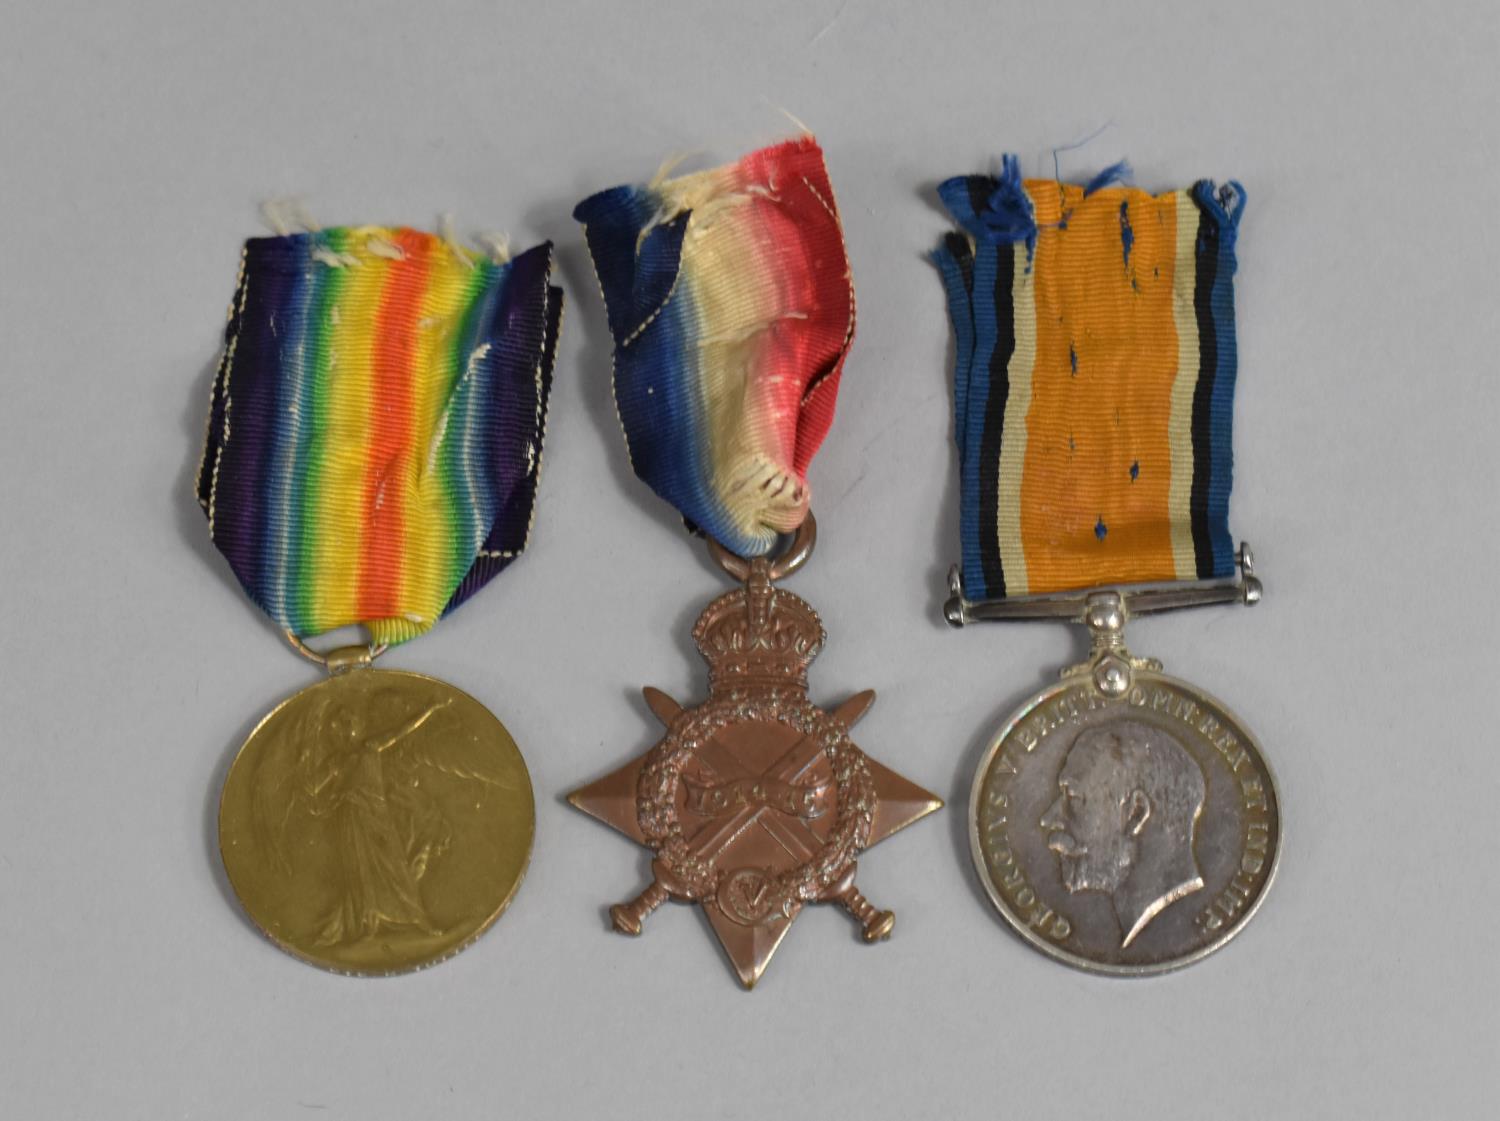 A Collection of Three WWI Medals Awarded to B Tuttle, Army Service Corps - Image 2 of 3